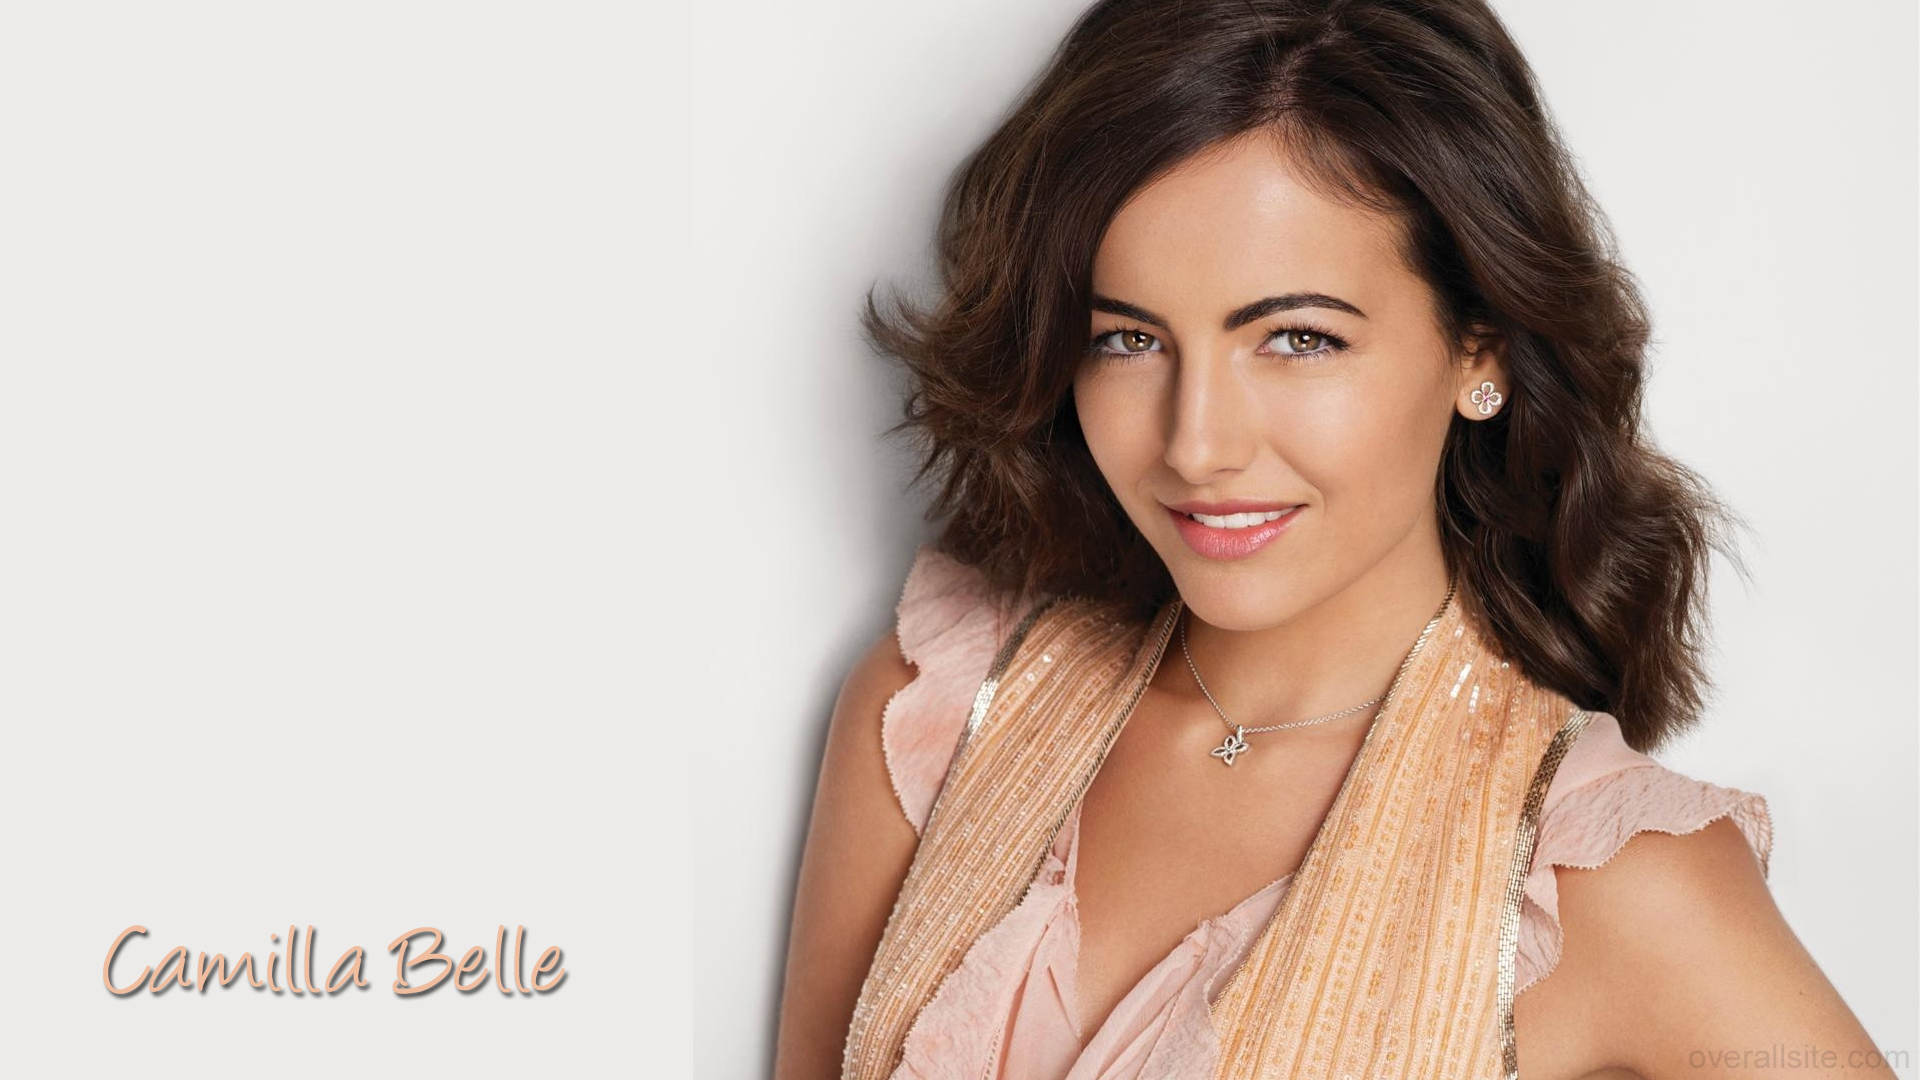 Camilla Belle Wallpaper High Resolution And Quality